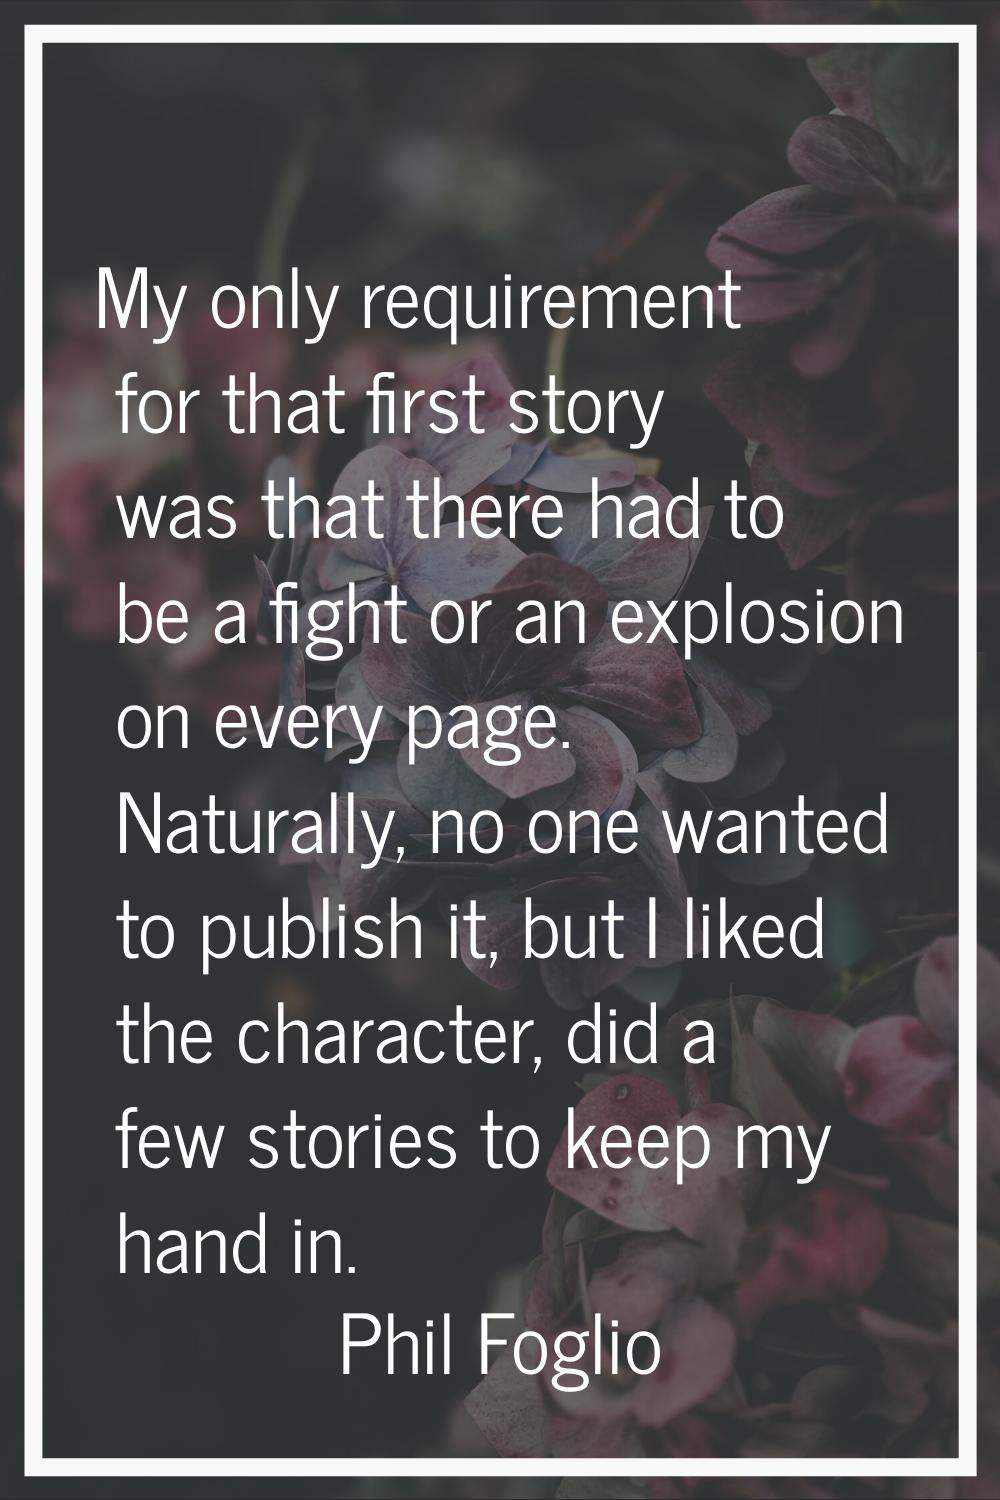 My only requirement for that first story was that there had to be a fight or an explosion on every 